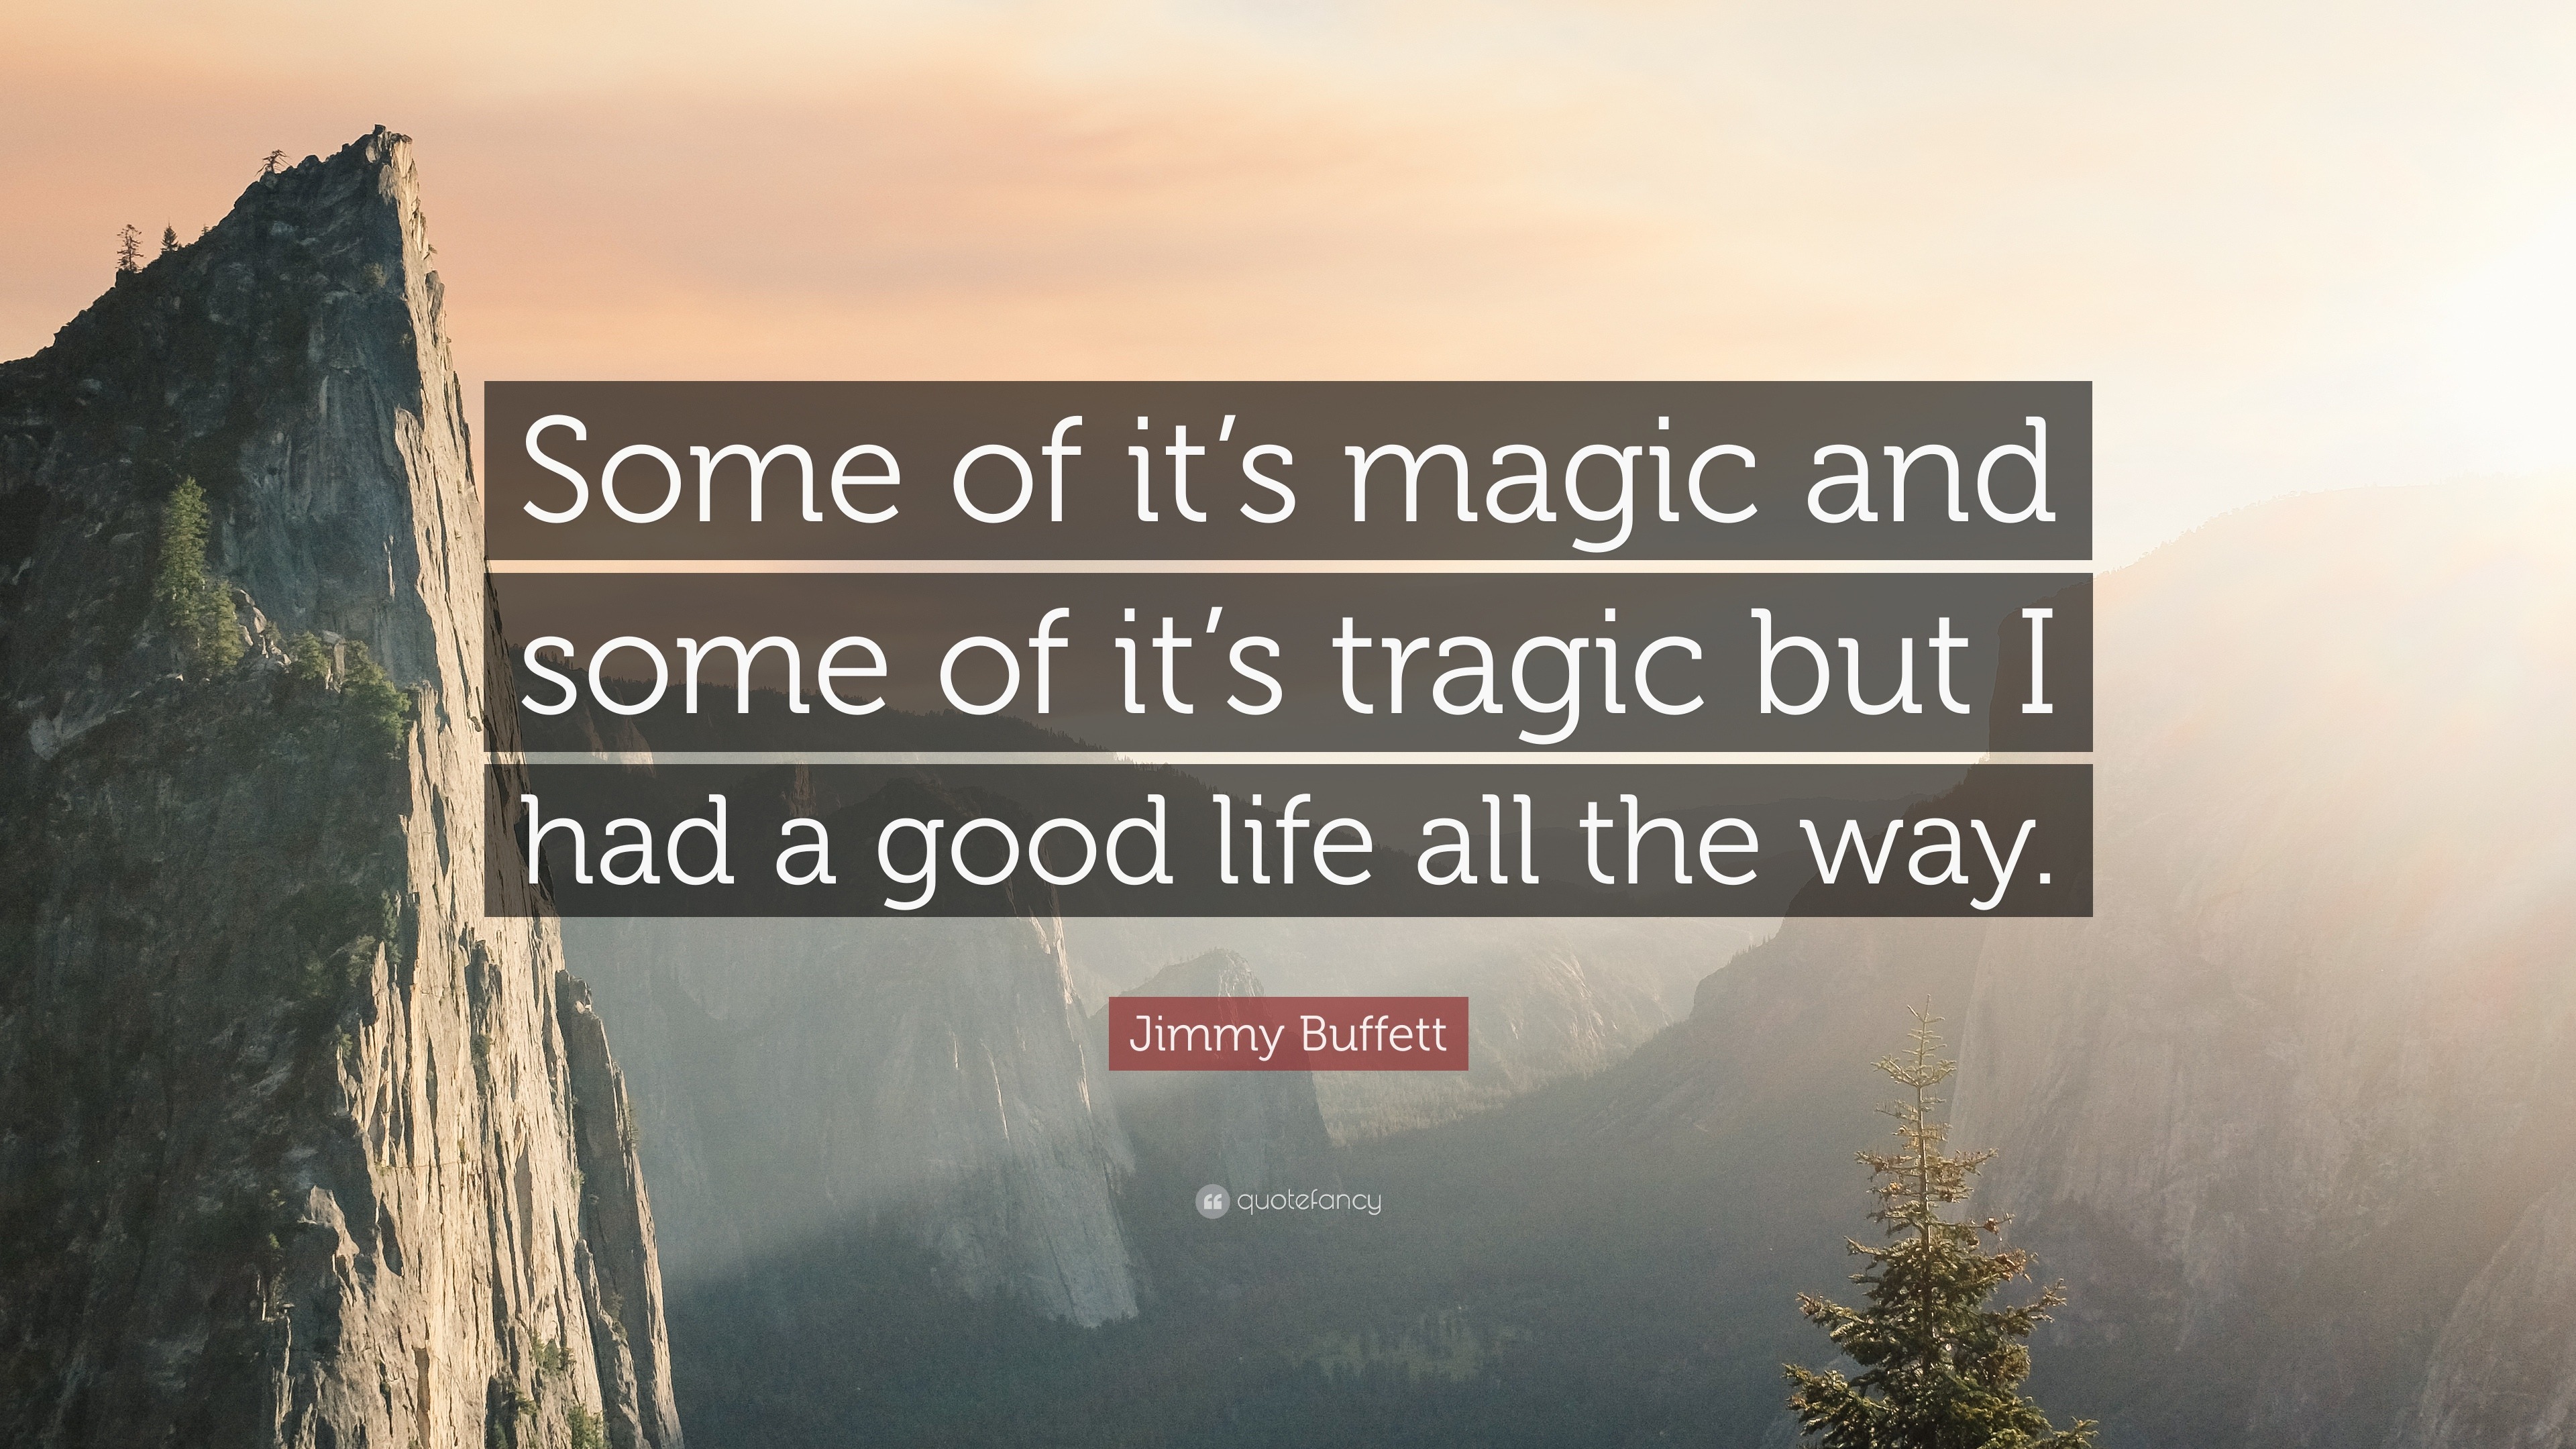 Jimmy Buffett Quote “some Of Its Magic And Some Of Its Tragic But I